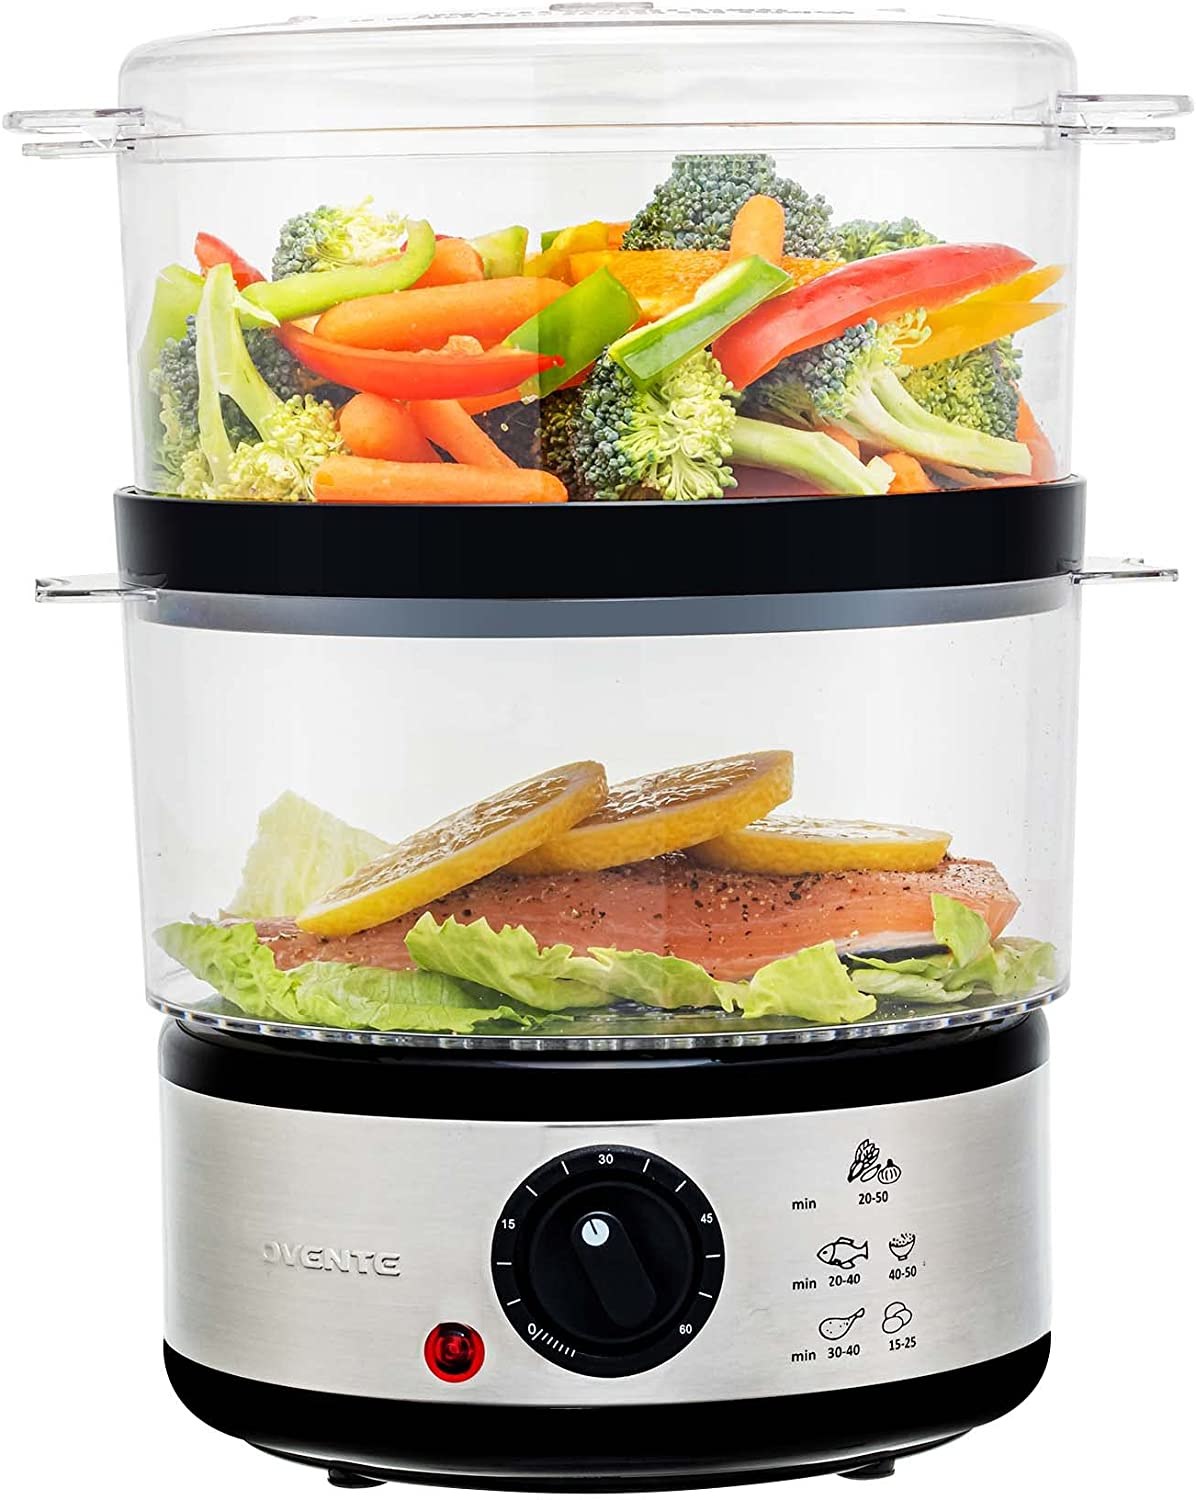 Top 5 Food Steamer To Try Some Healthy And Wholesome Recipes